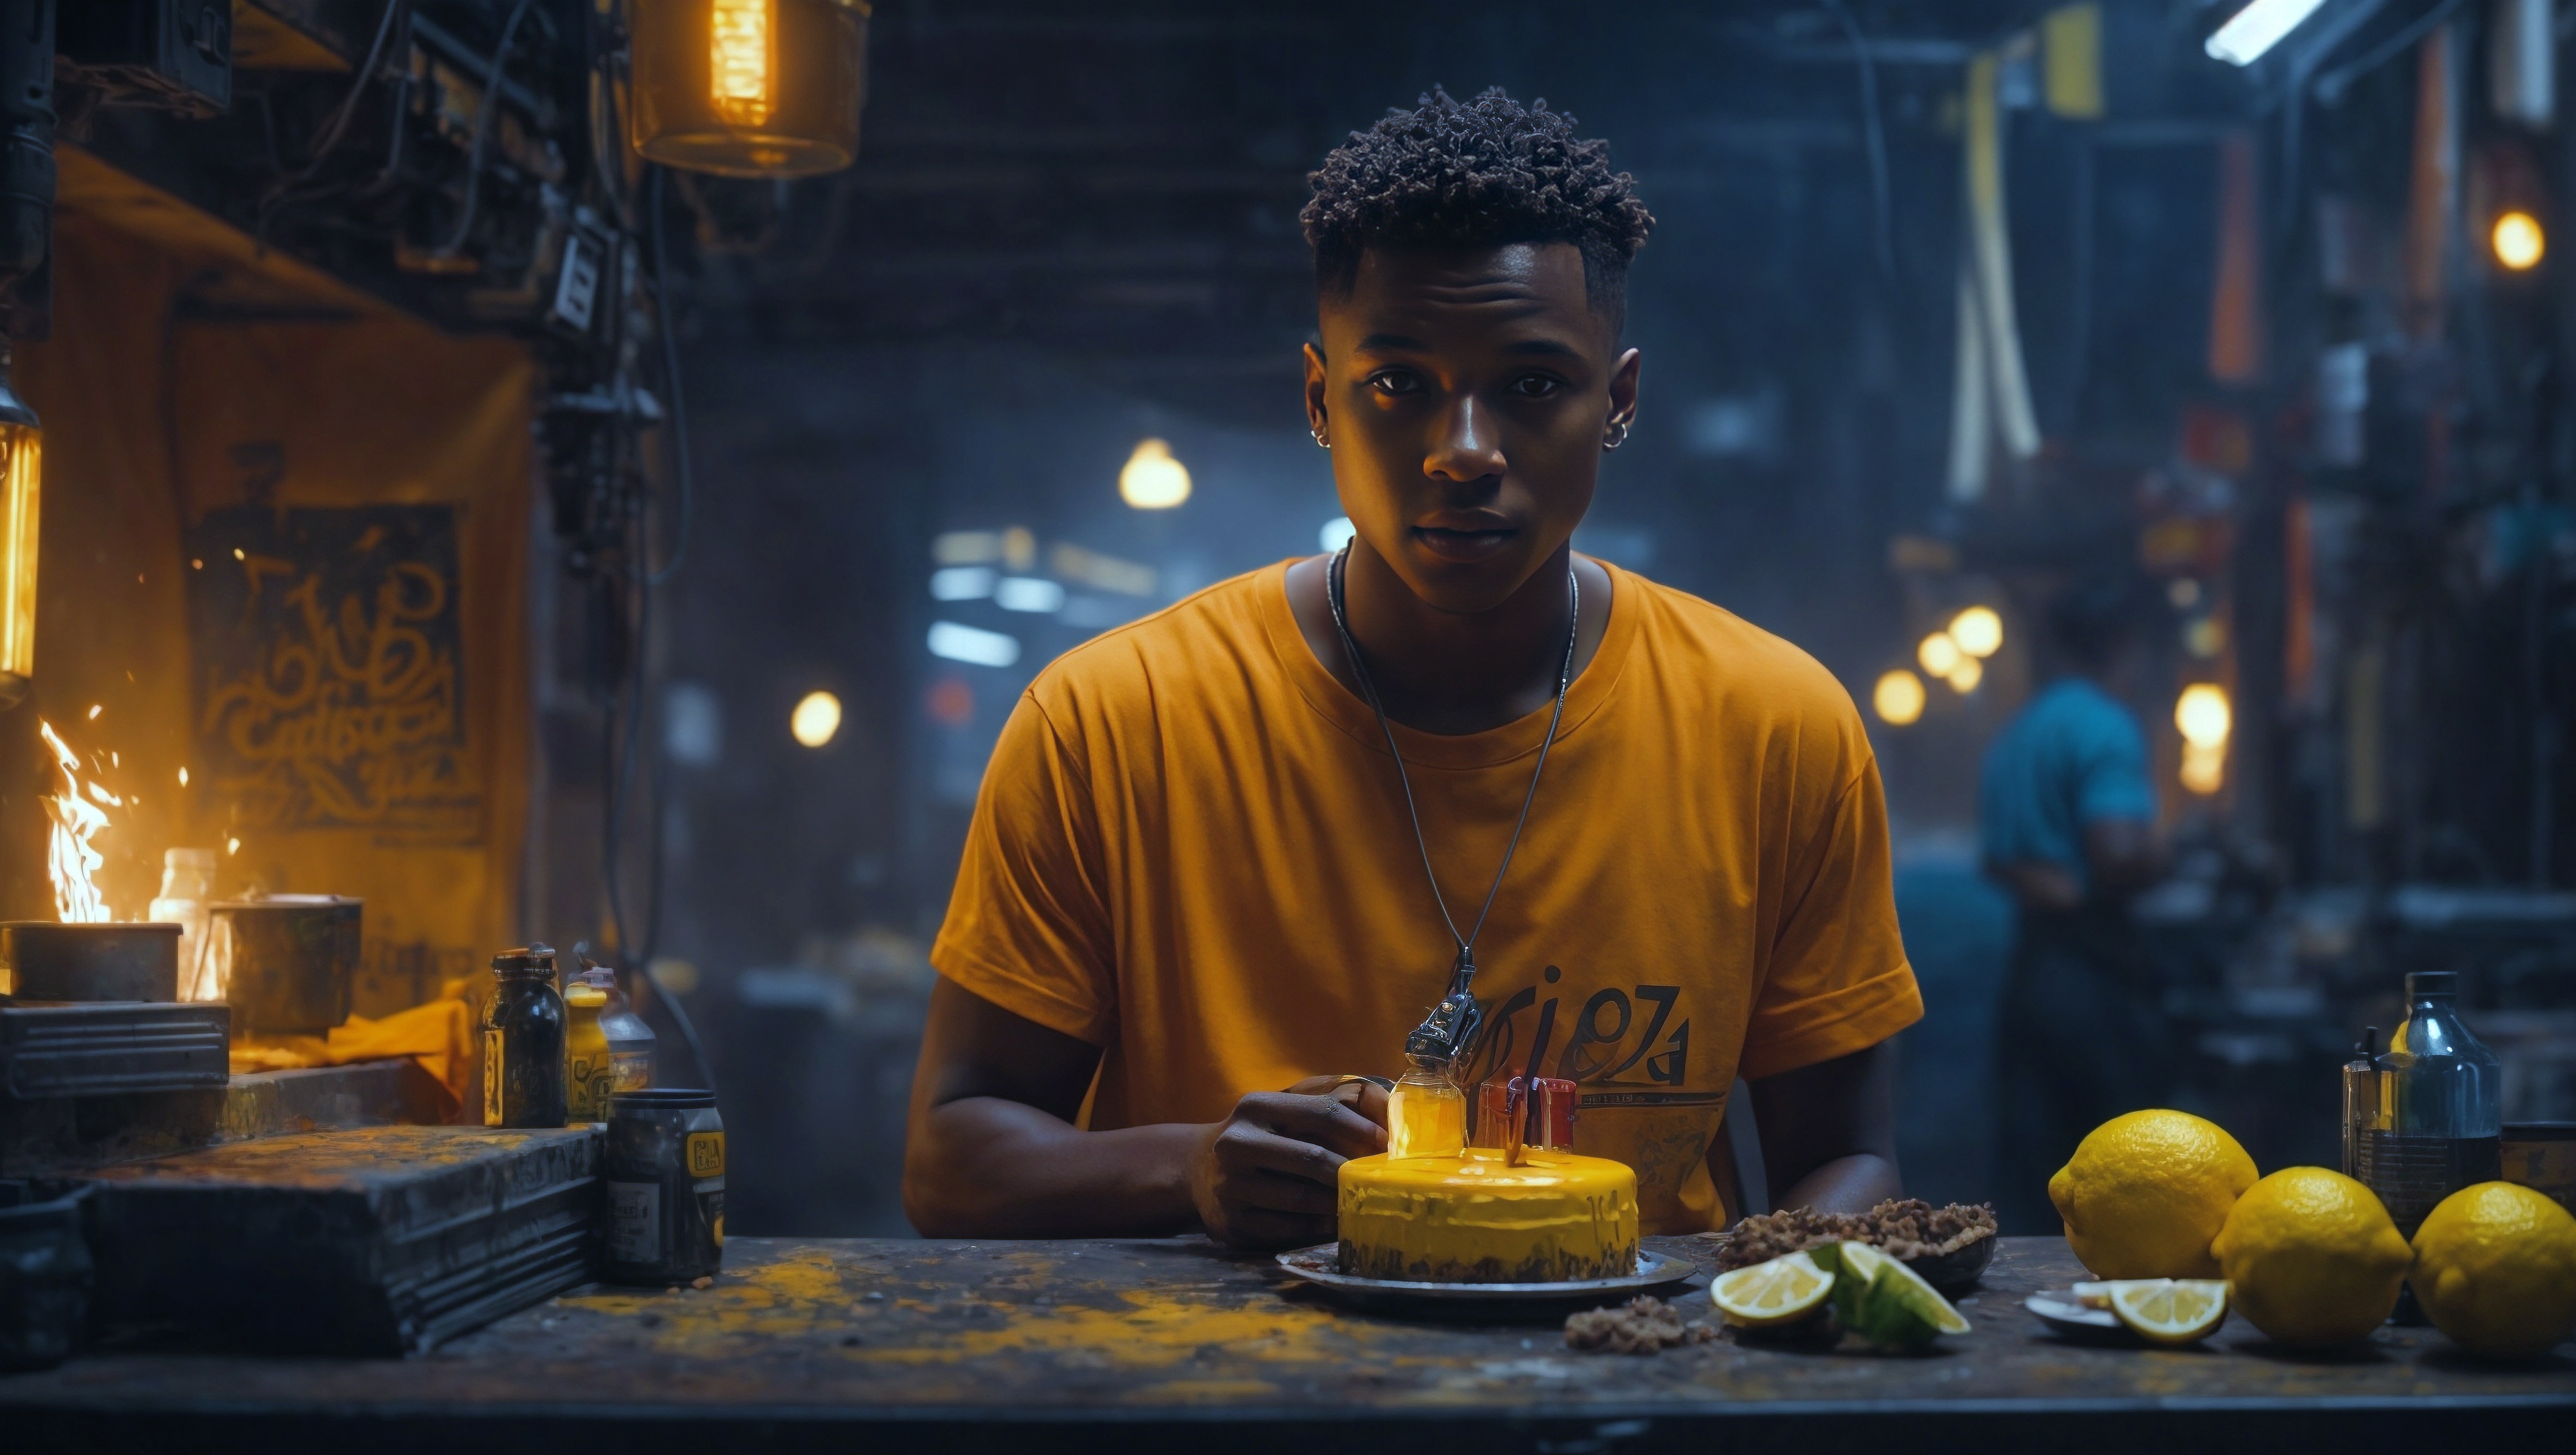 Free photo A young man standing in front of a table that has a cake with candles and lemons on it